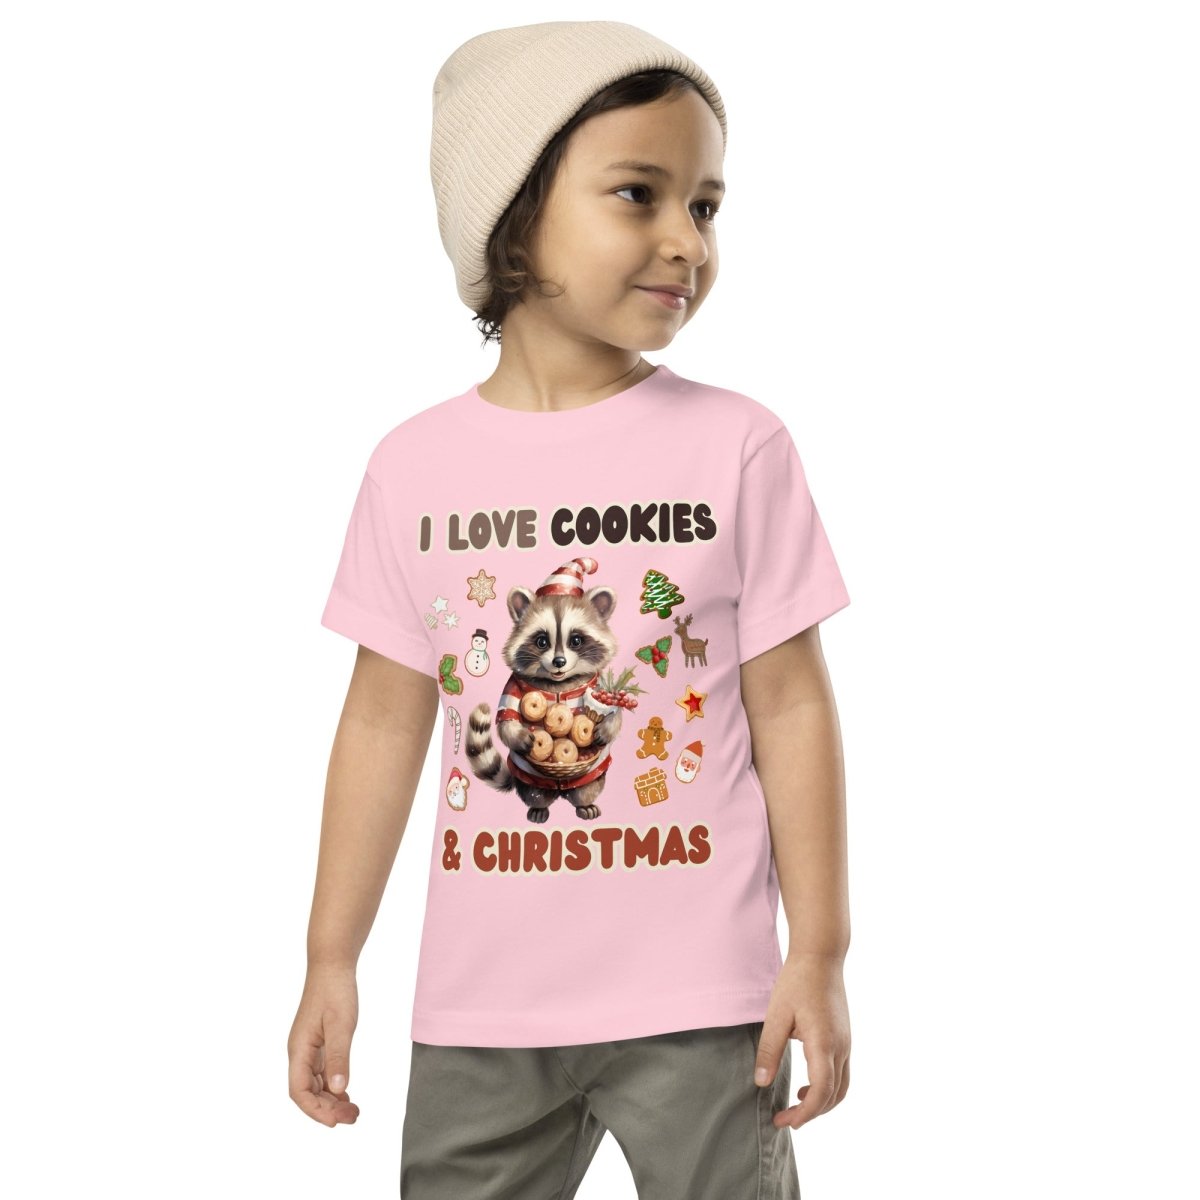 I love Christmas Cookies T-Shirt - High Quality Funny Children T-Shirt, Holiday Shirt, Toddler Christmas Vacation Tee, Cute Raccoon Tee - Everything Pixel